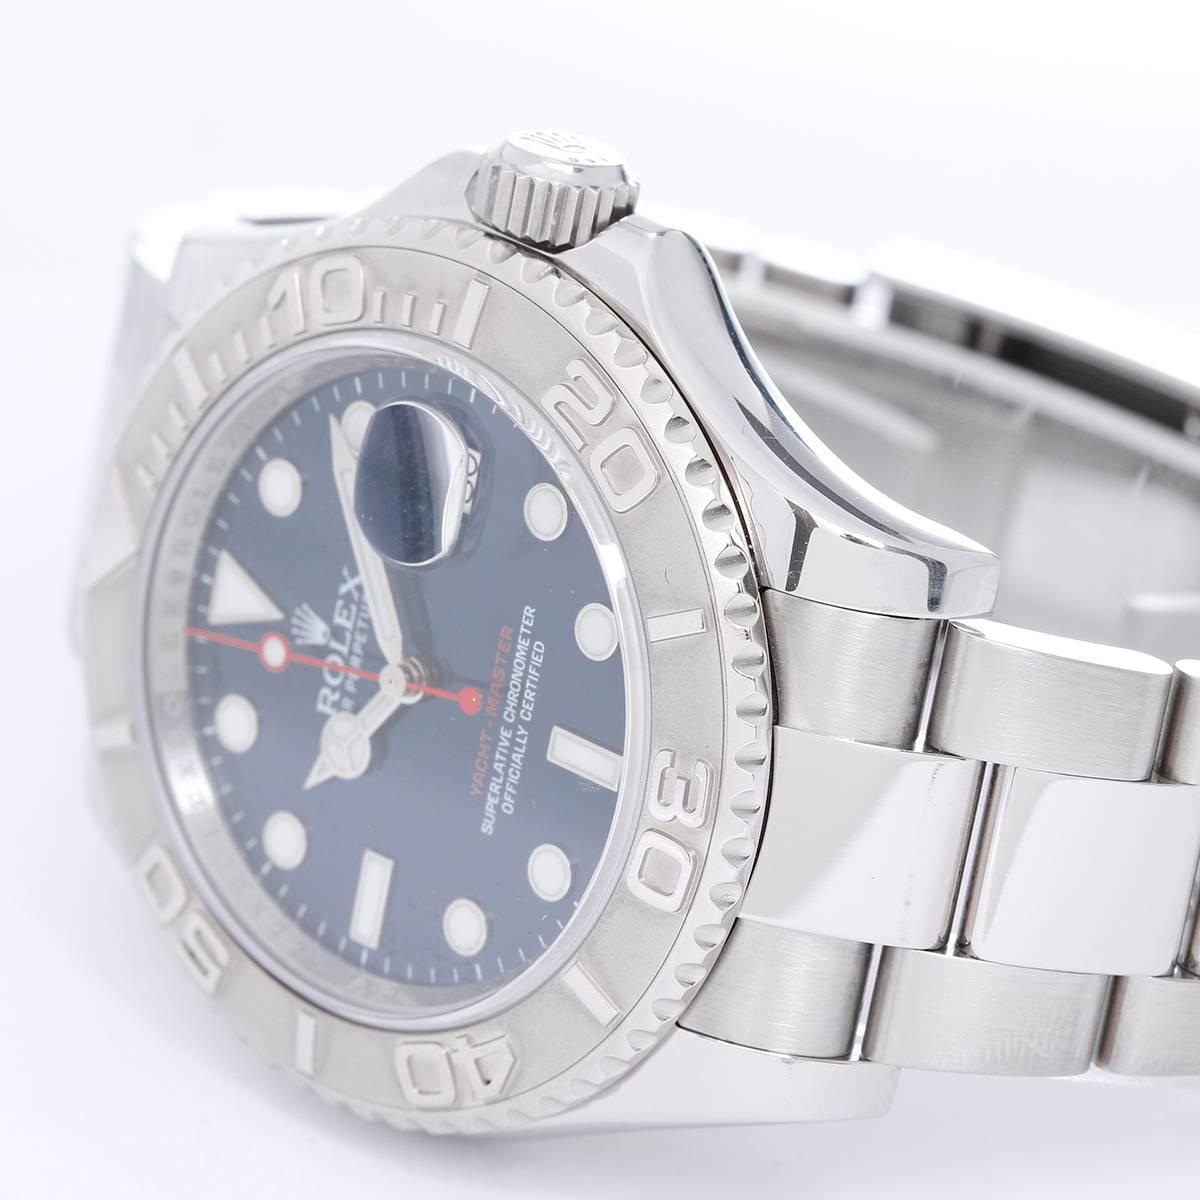 Rolex Yacht-Master Men's Stainless Steel Watch 116622 - Automatic winding, 31 jewels, Quickset, sapphire crystal. Stainless steel case with platinum bezel (40mm diameter). Blue dial with luminous markers. Stainless steel Oyster bracelet with updated